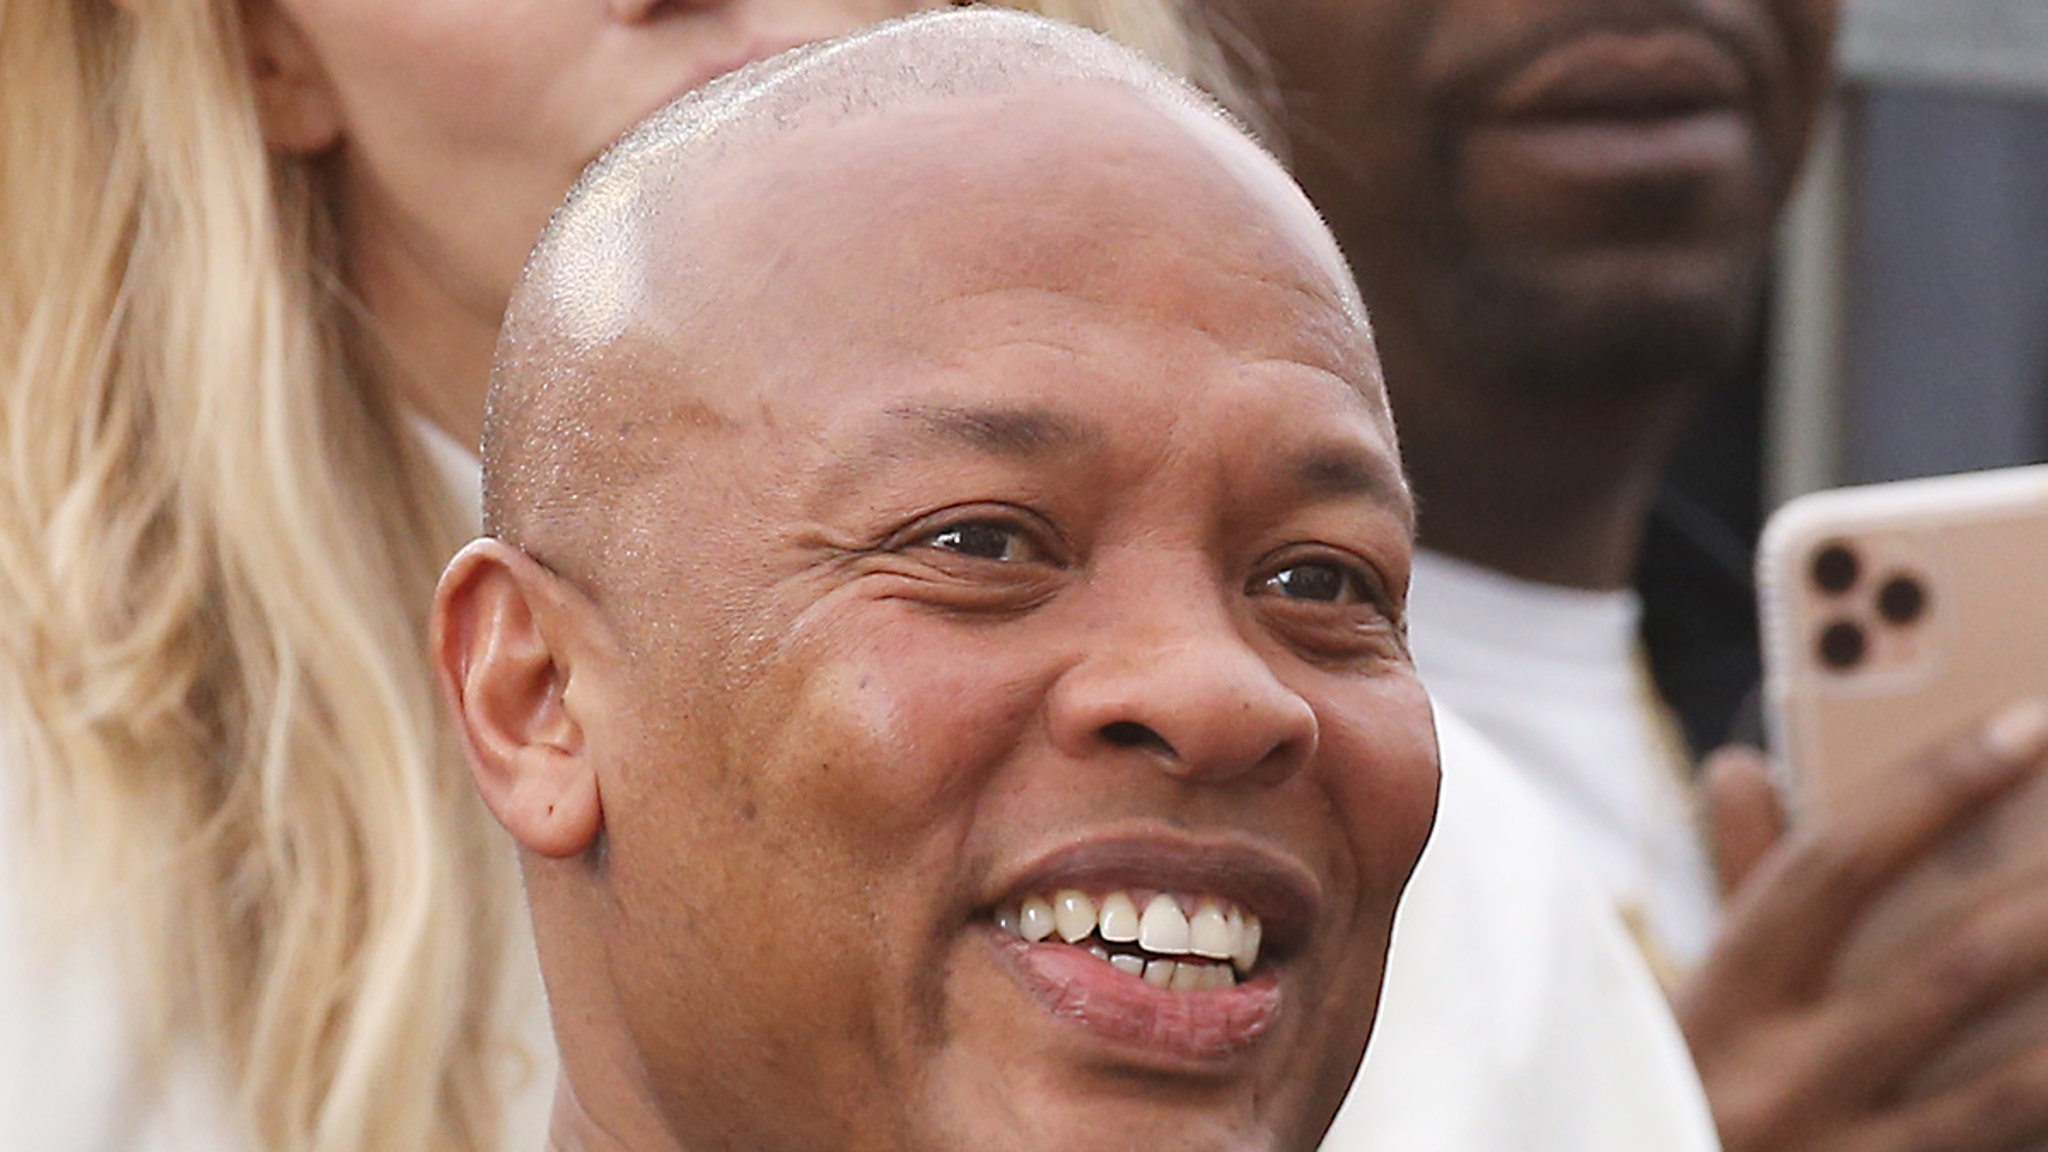 Dr.  Dre was discharged from hospital after brain neurism